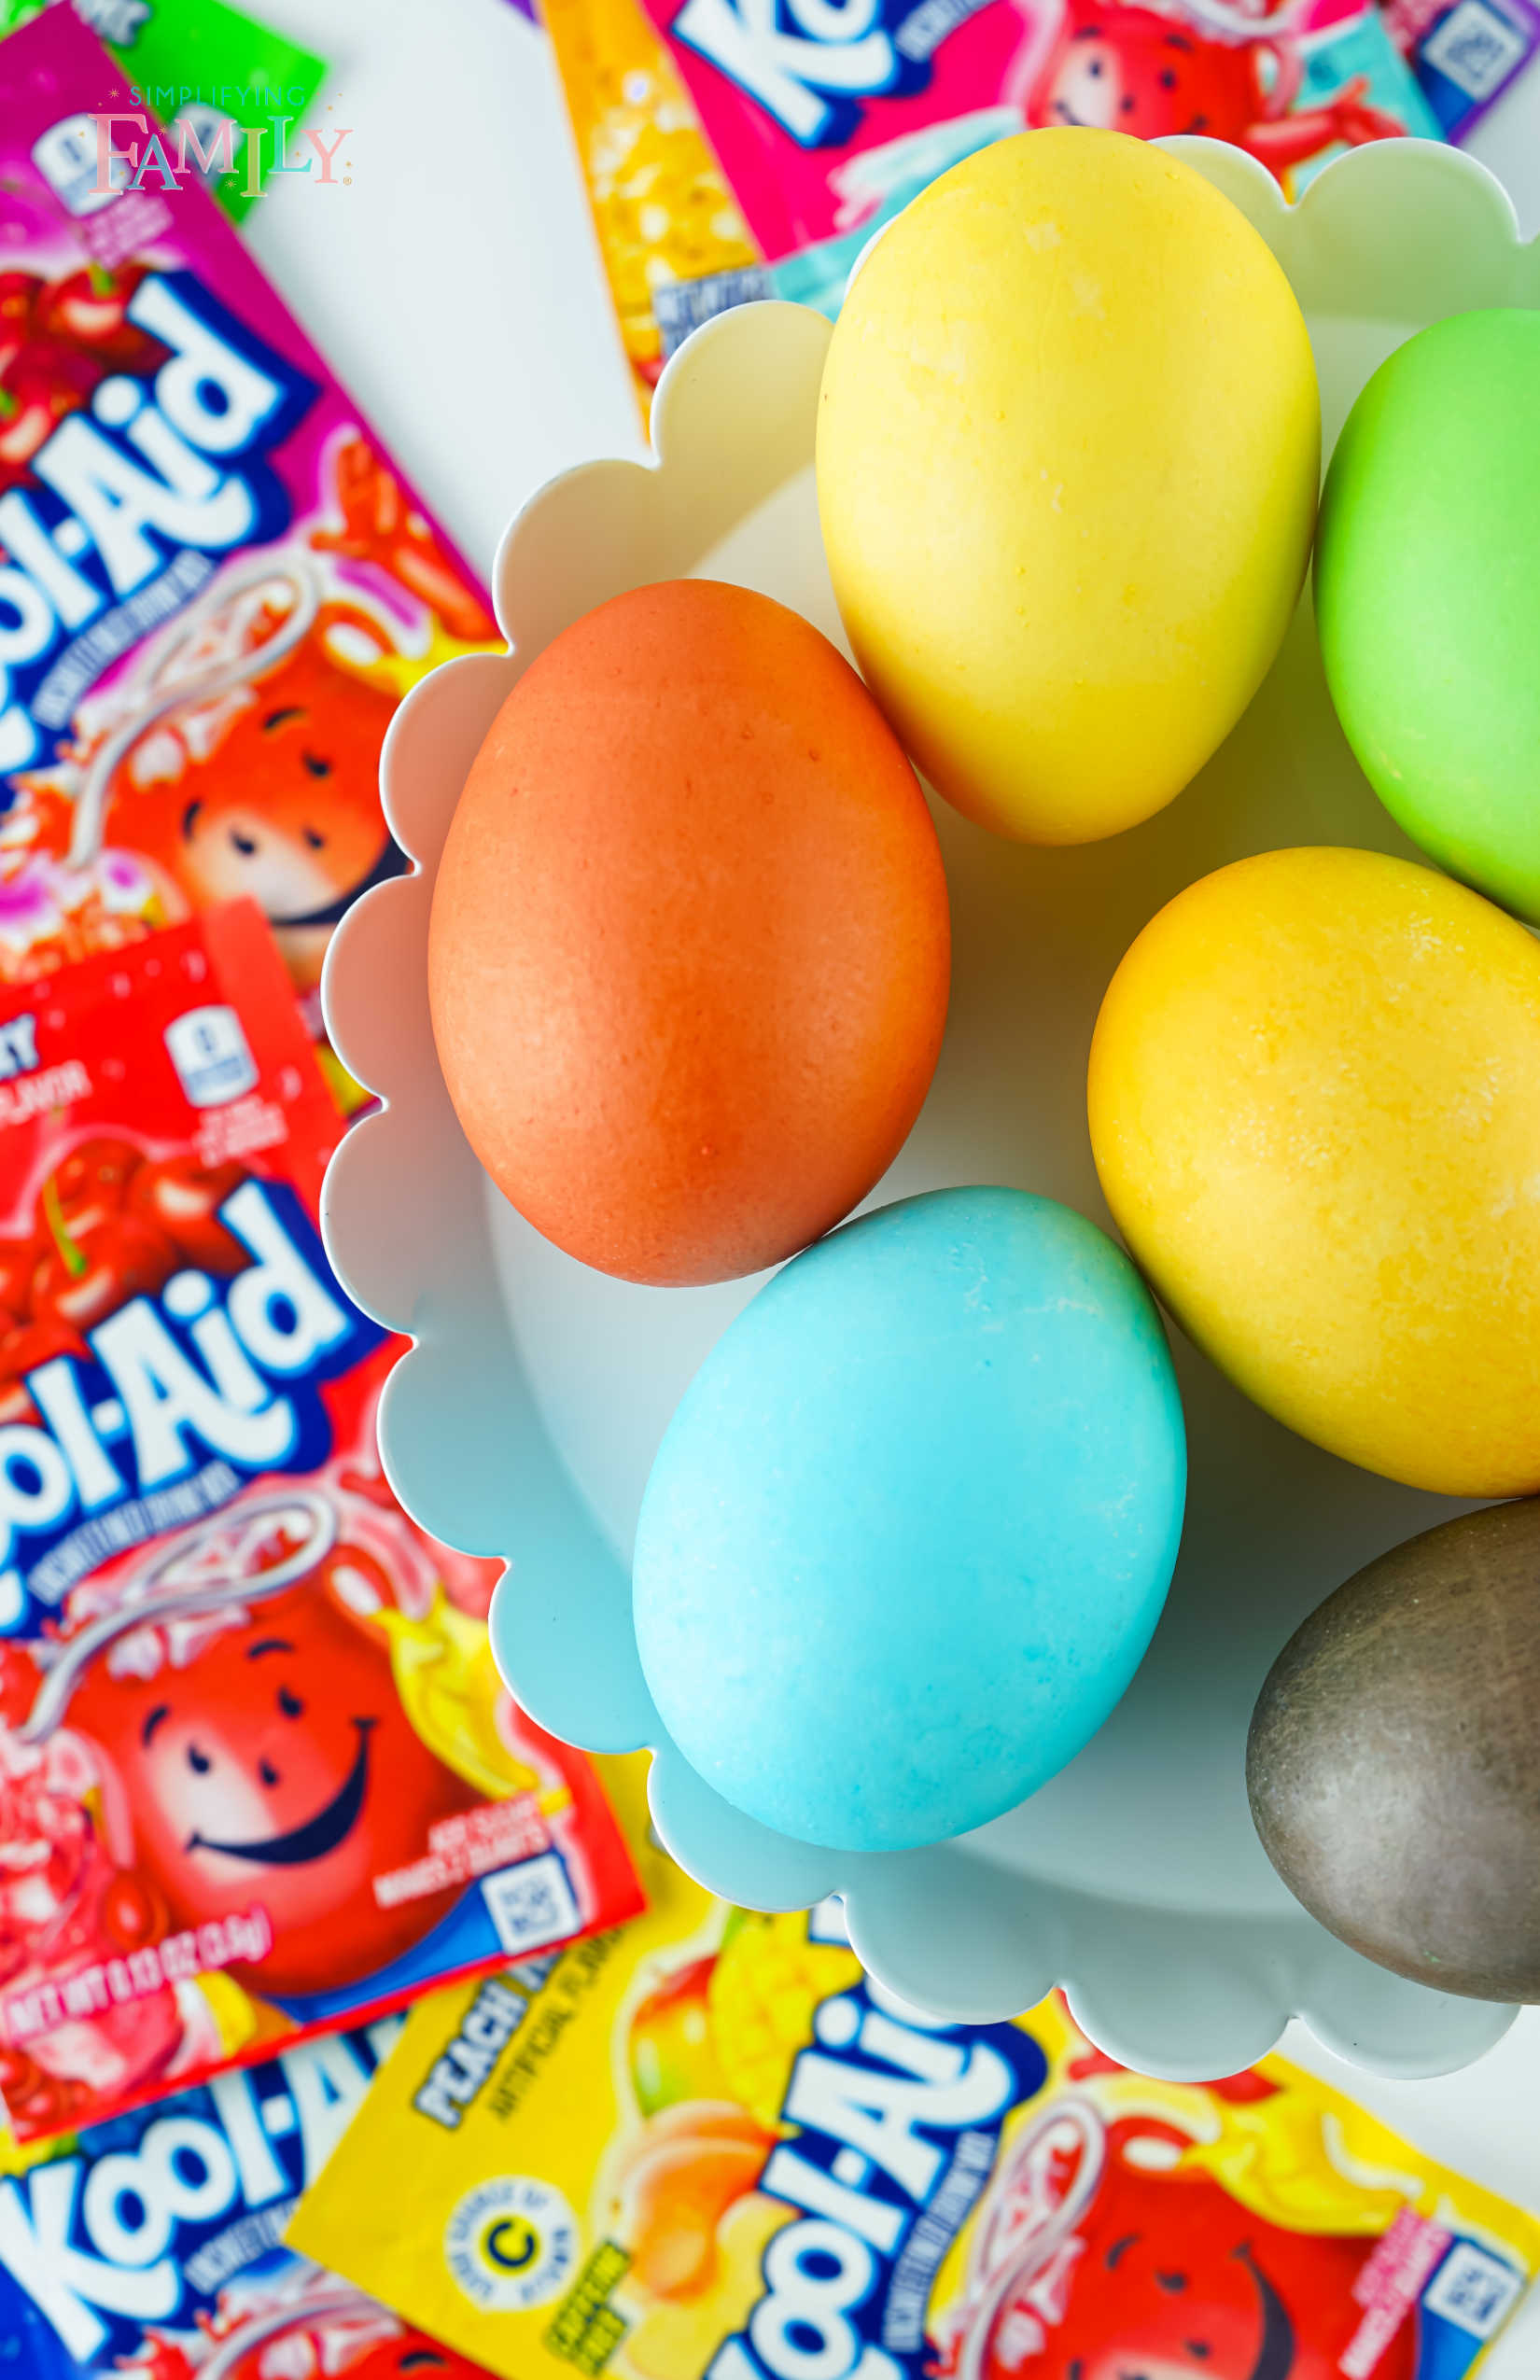 How to Dye Eggs With Kool Aid For Easter With 3 Easy Ingredients